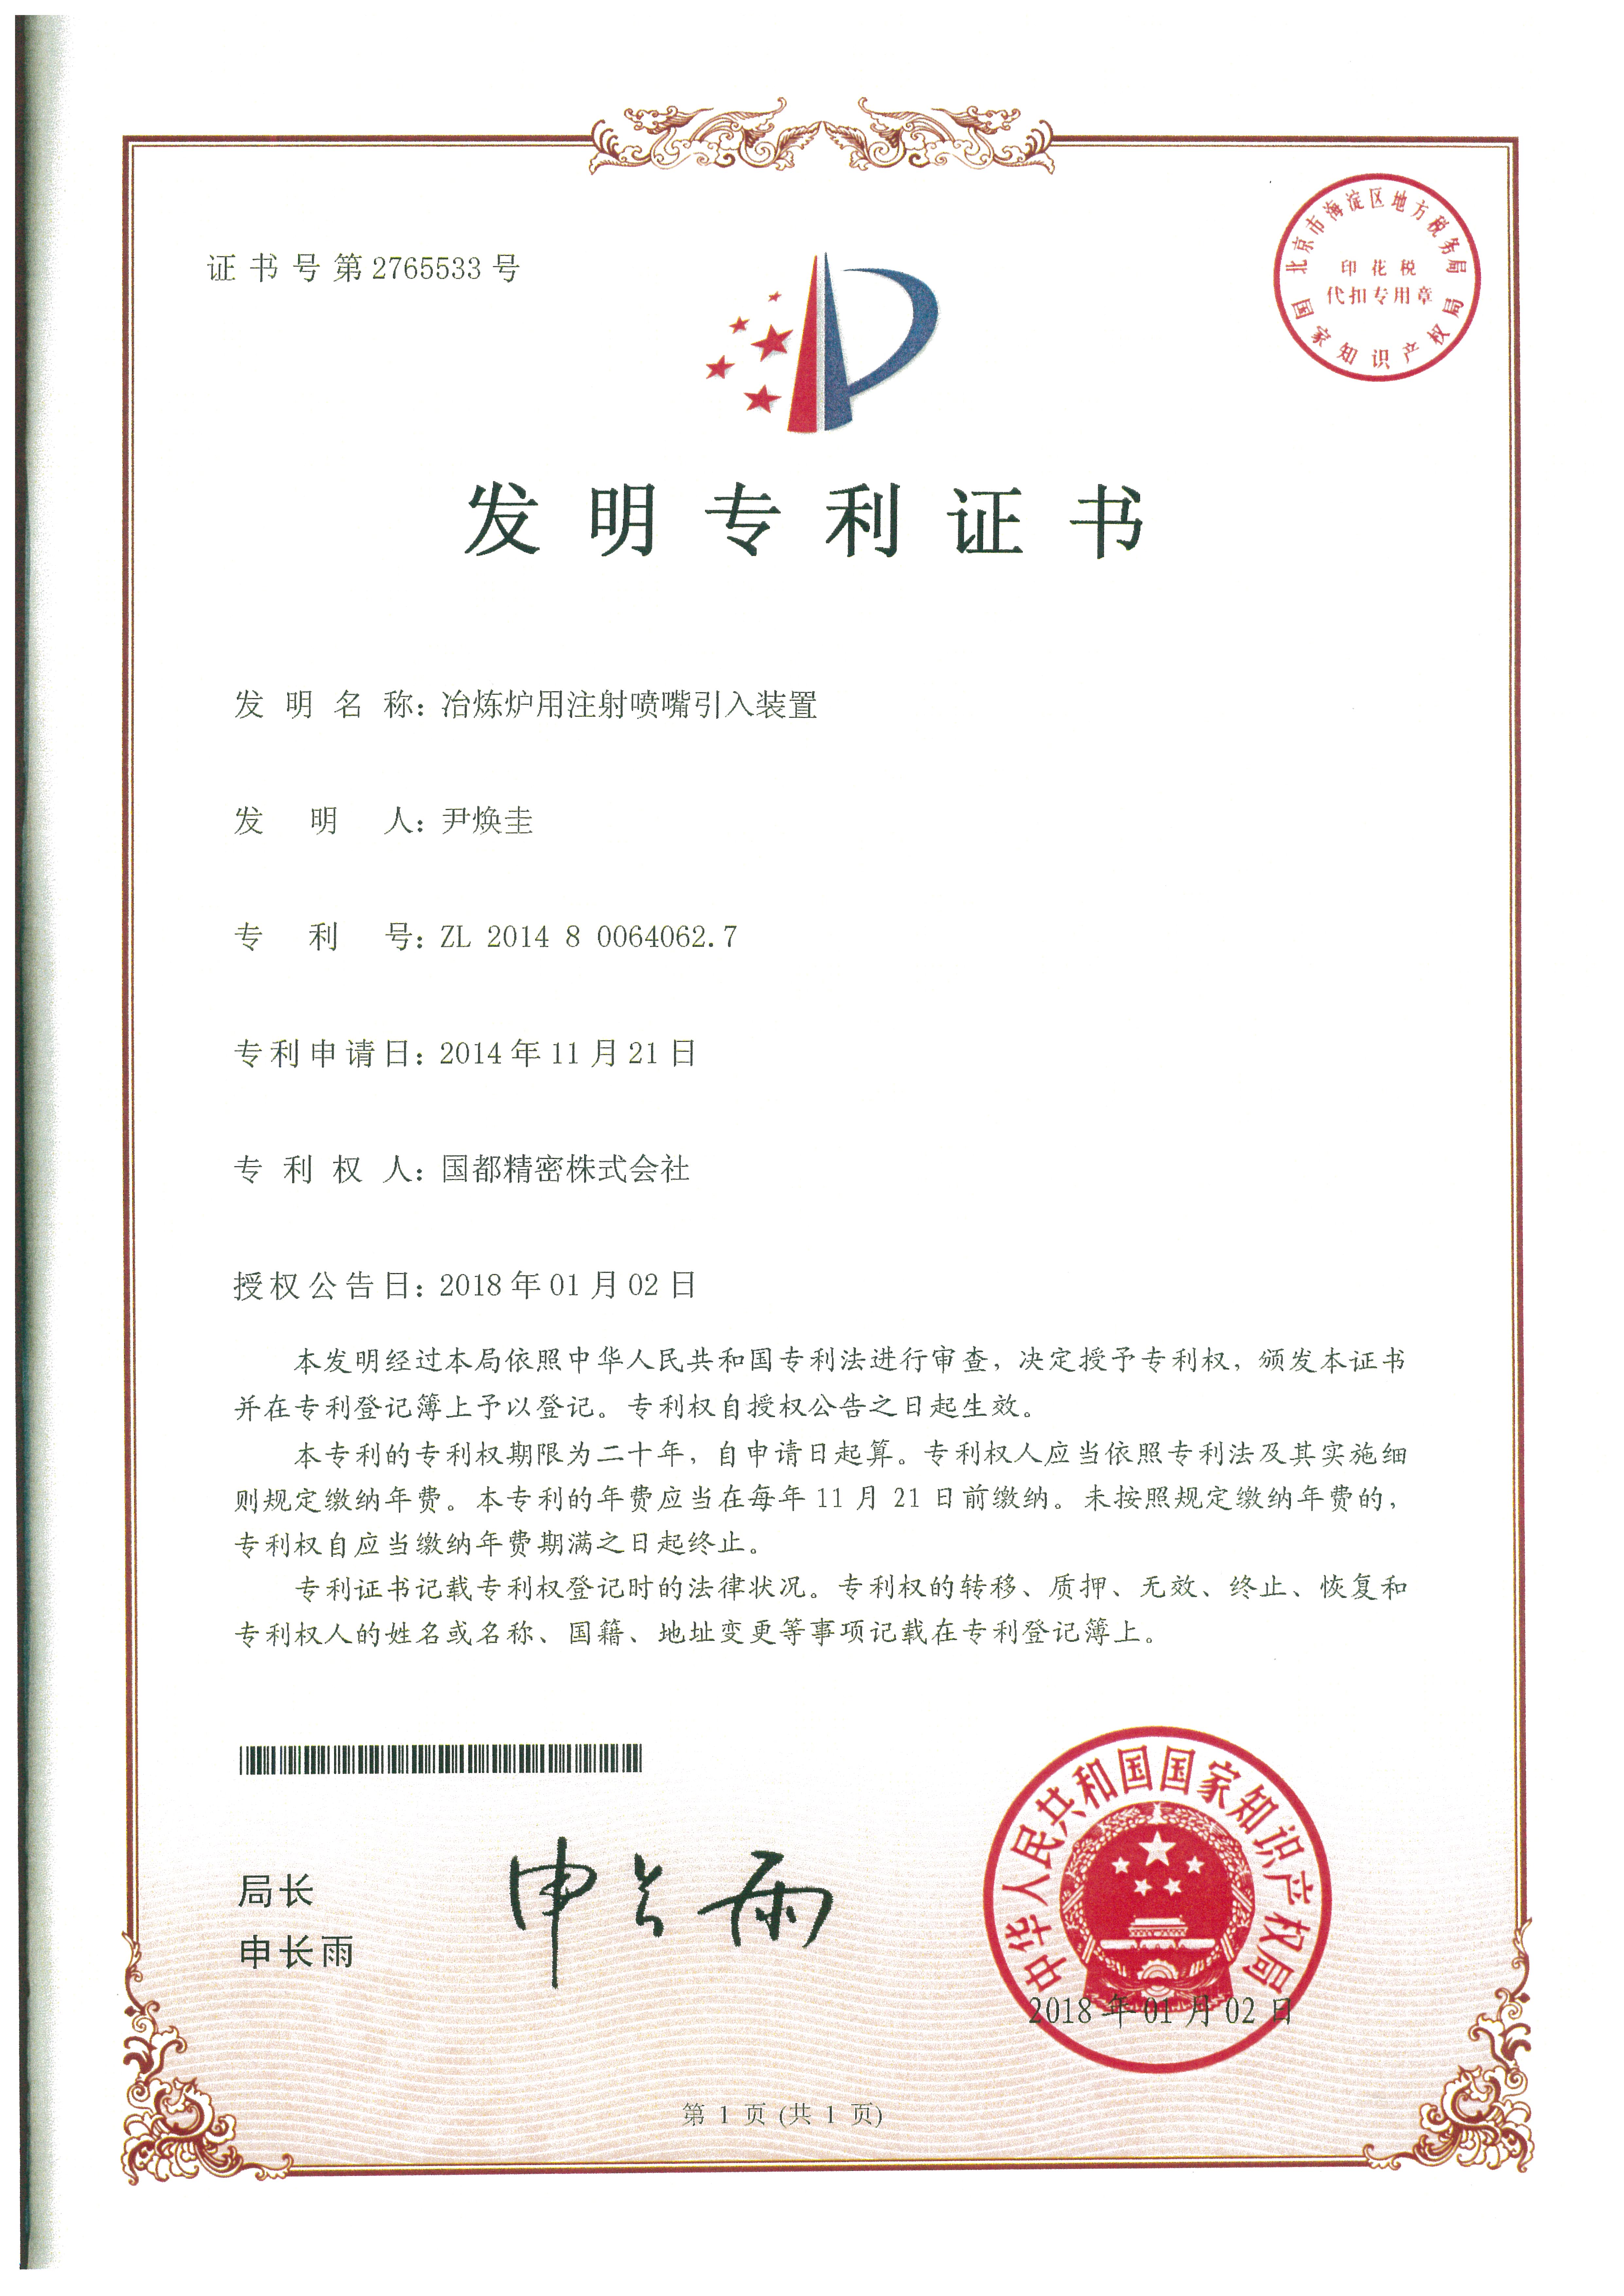 Chinese Certificate of Patent2